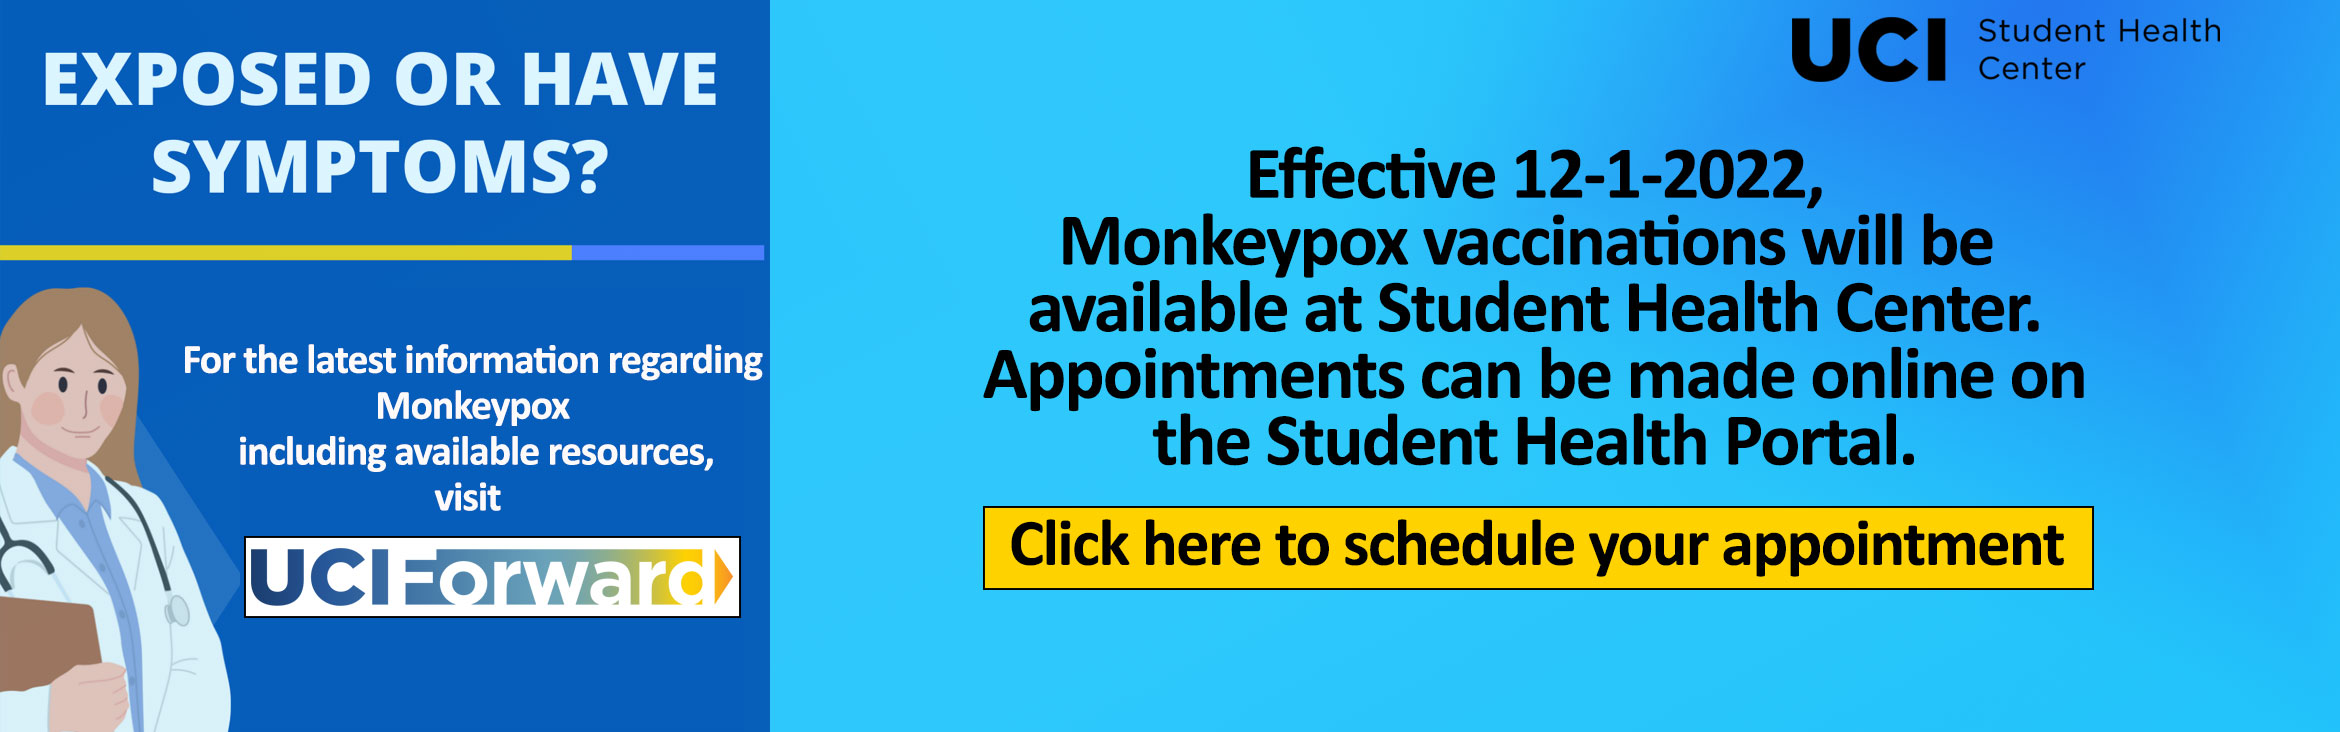 Effective 12/1/22 Monkeypox Vaccinations will be available at the Student Health Center. Appointments can be made online on the Student Health Portal.